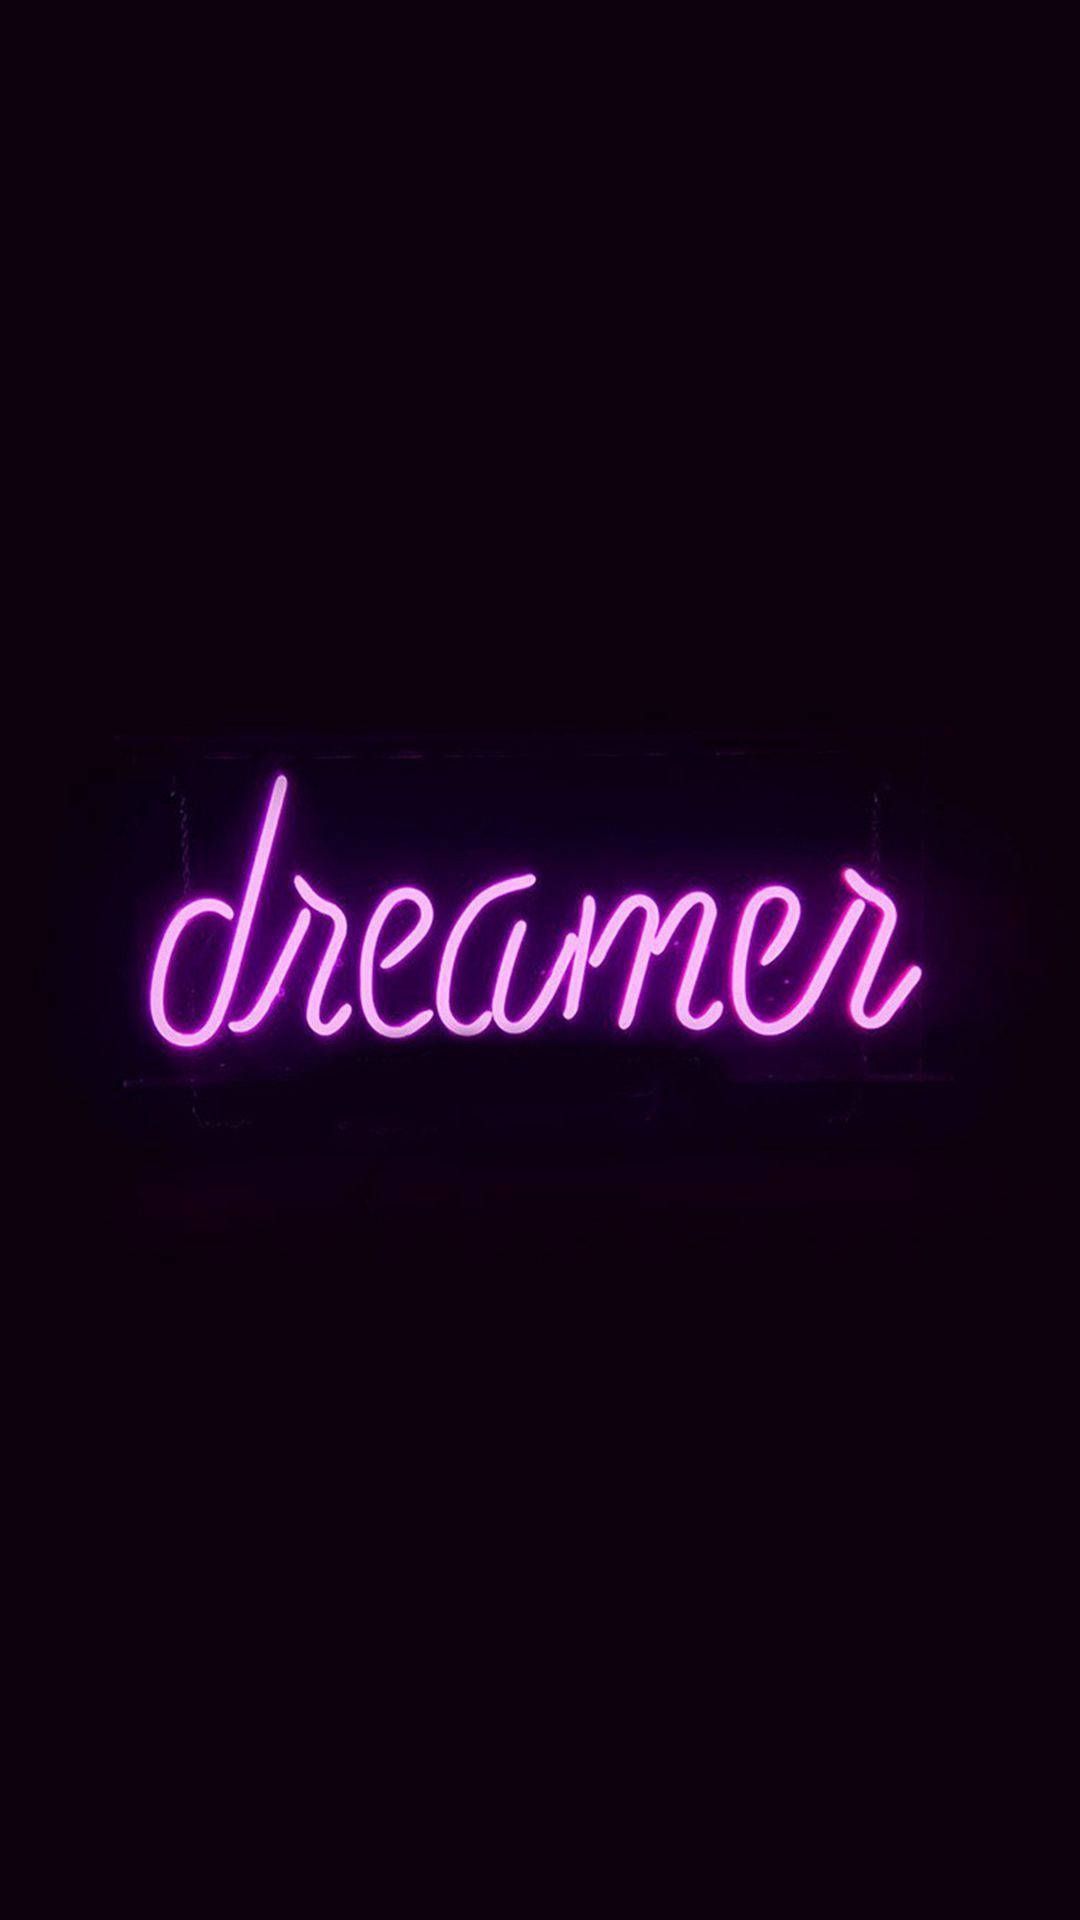 Neon sign that says dreamer in purple - Neon